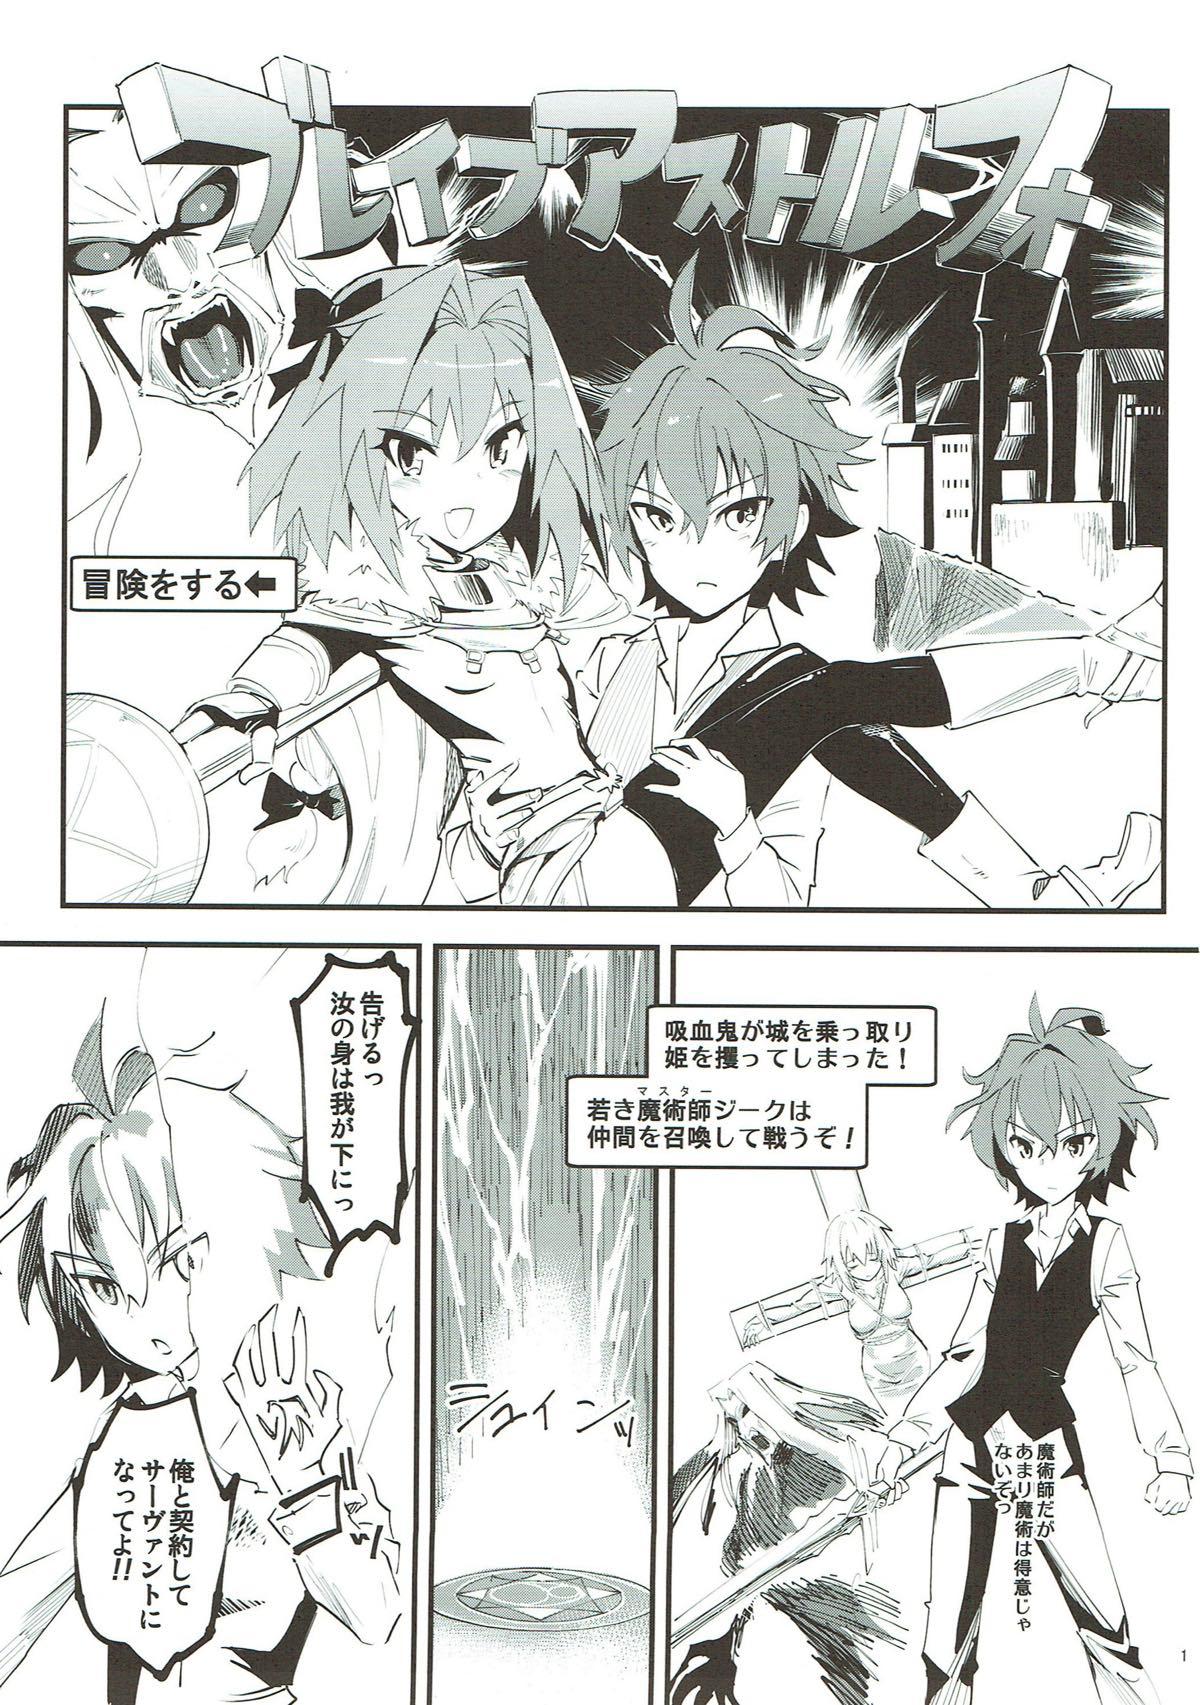 Climax CLASS CHANGE!! Brave Astolfo - Fate apocrypha Girl Girl - Page 2